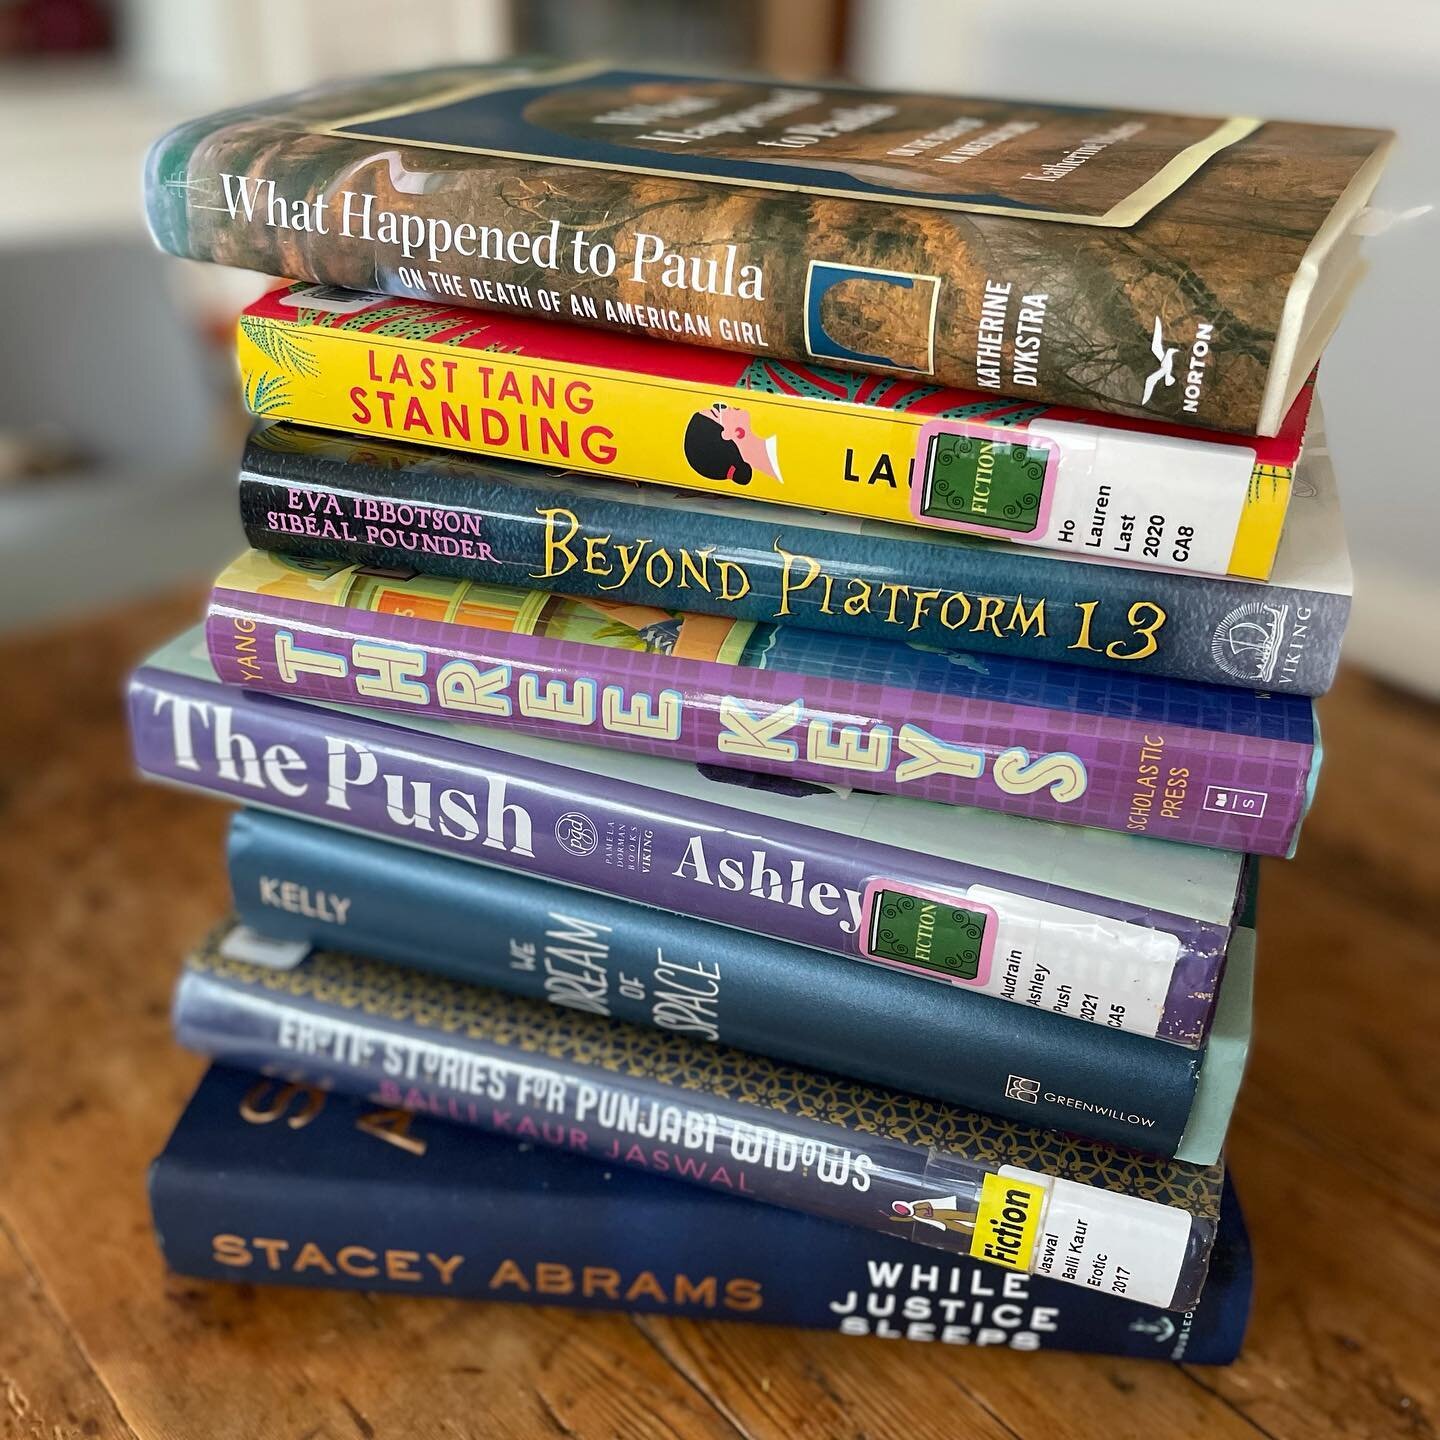 Someone said summer vacation and I must&rsquo;ve gotten confused&mdash;I thought that meant I was going to have long lazy days for burning through my TBR pile, like I did as a kid when I used to read a book day for stamps from the @cambridgepubliclib